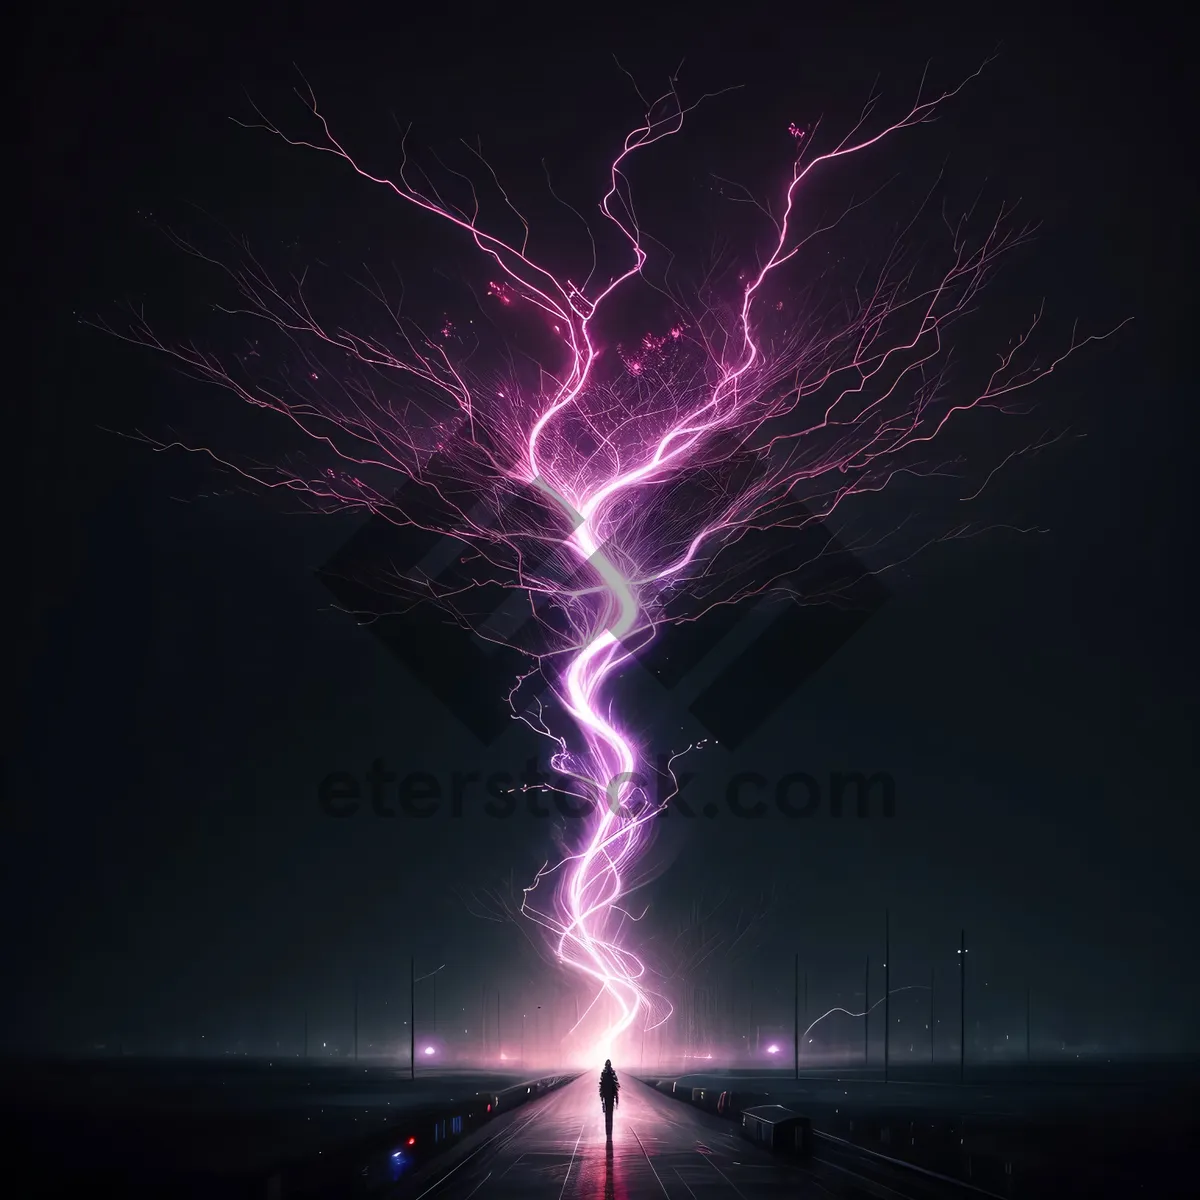 Picture of Electric Glow: Fractal Lightning Design with Geometric Lines